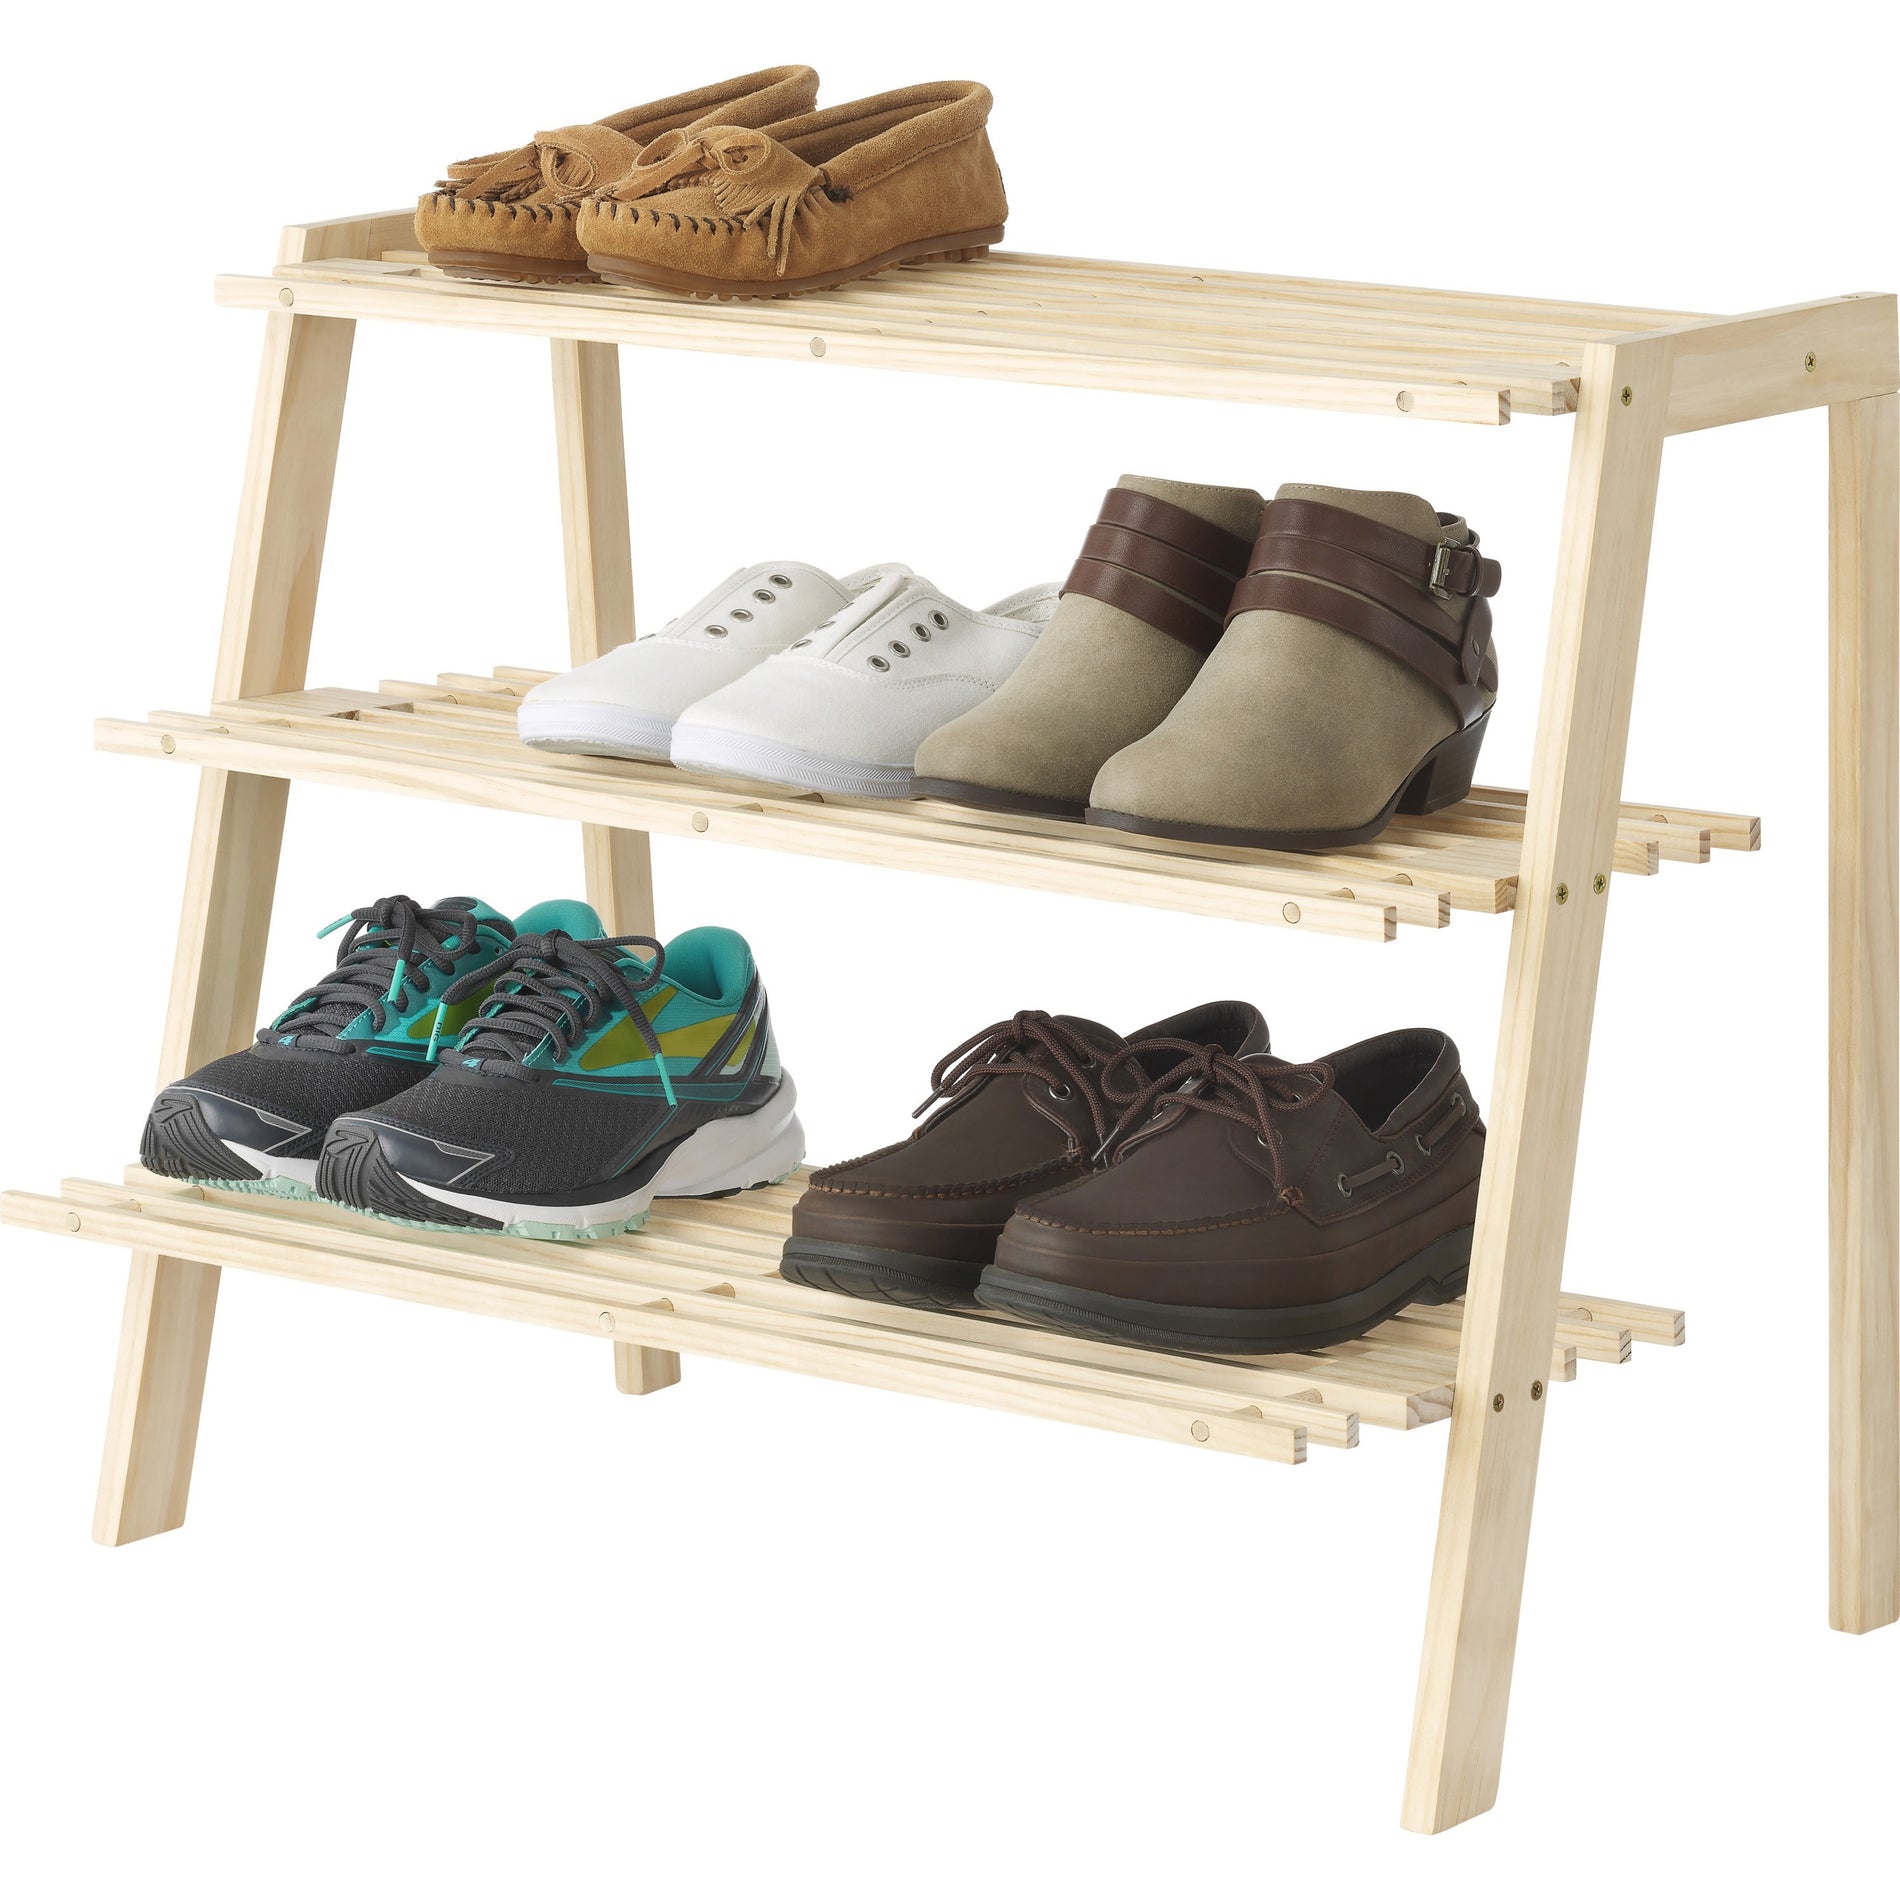 Whitmor 6026-8804 Shoe Rack, 3 Tier Brown Wood, Compact for Dorm Room, Shoes, Clothes, Garage, Apartment